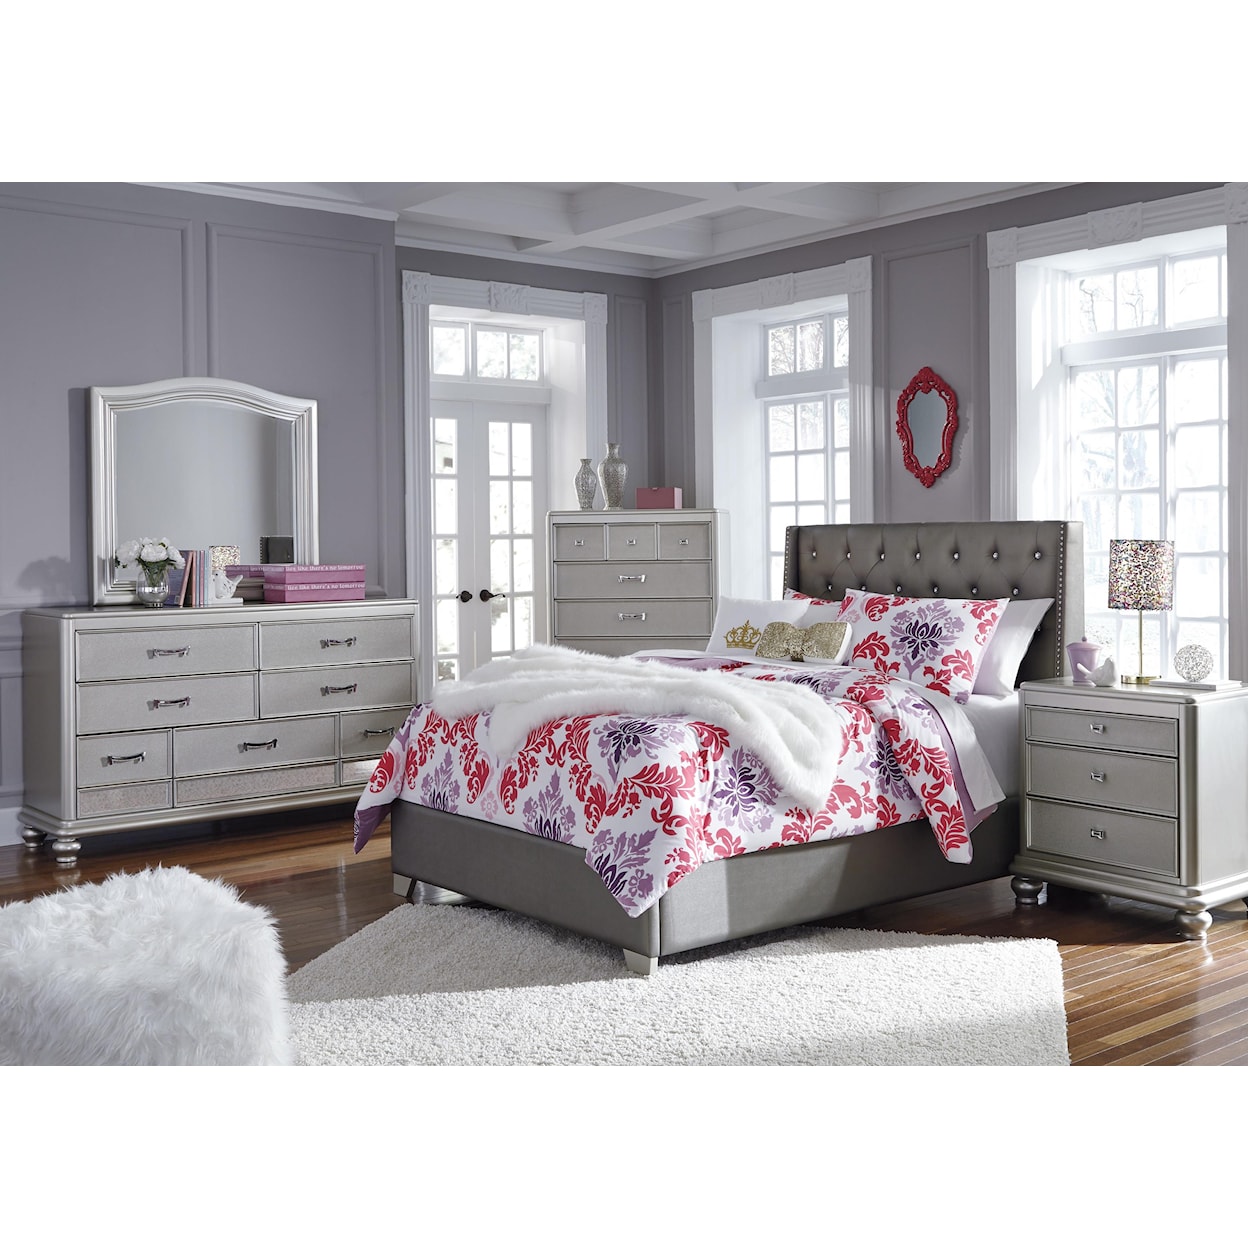 Signature Design by Ashley Coralayne 6 Piece Upholstered Full Bedroom Set